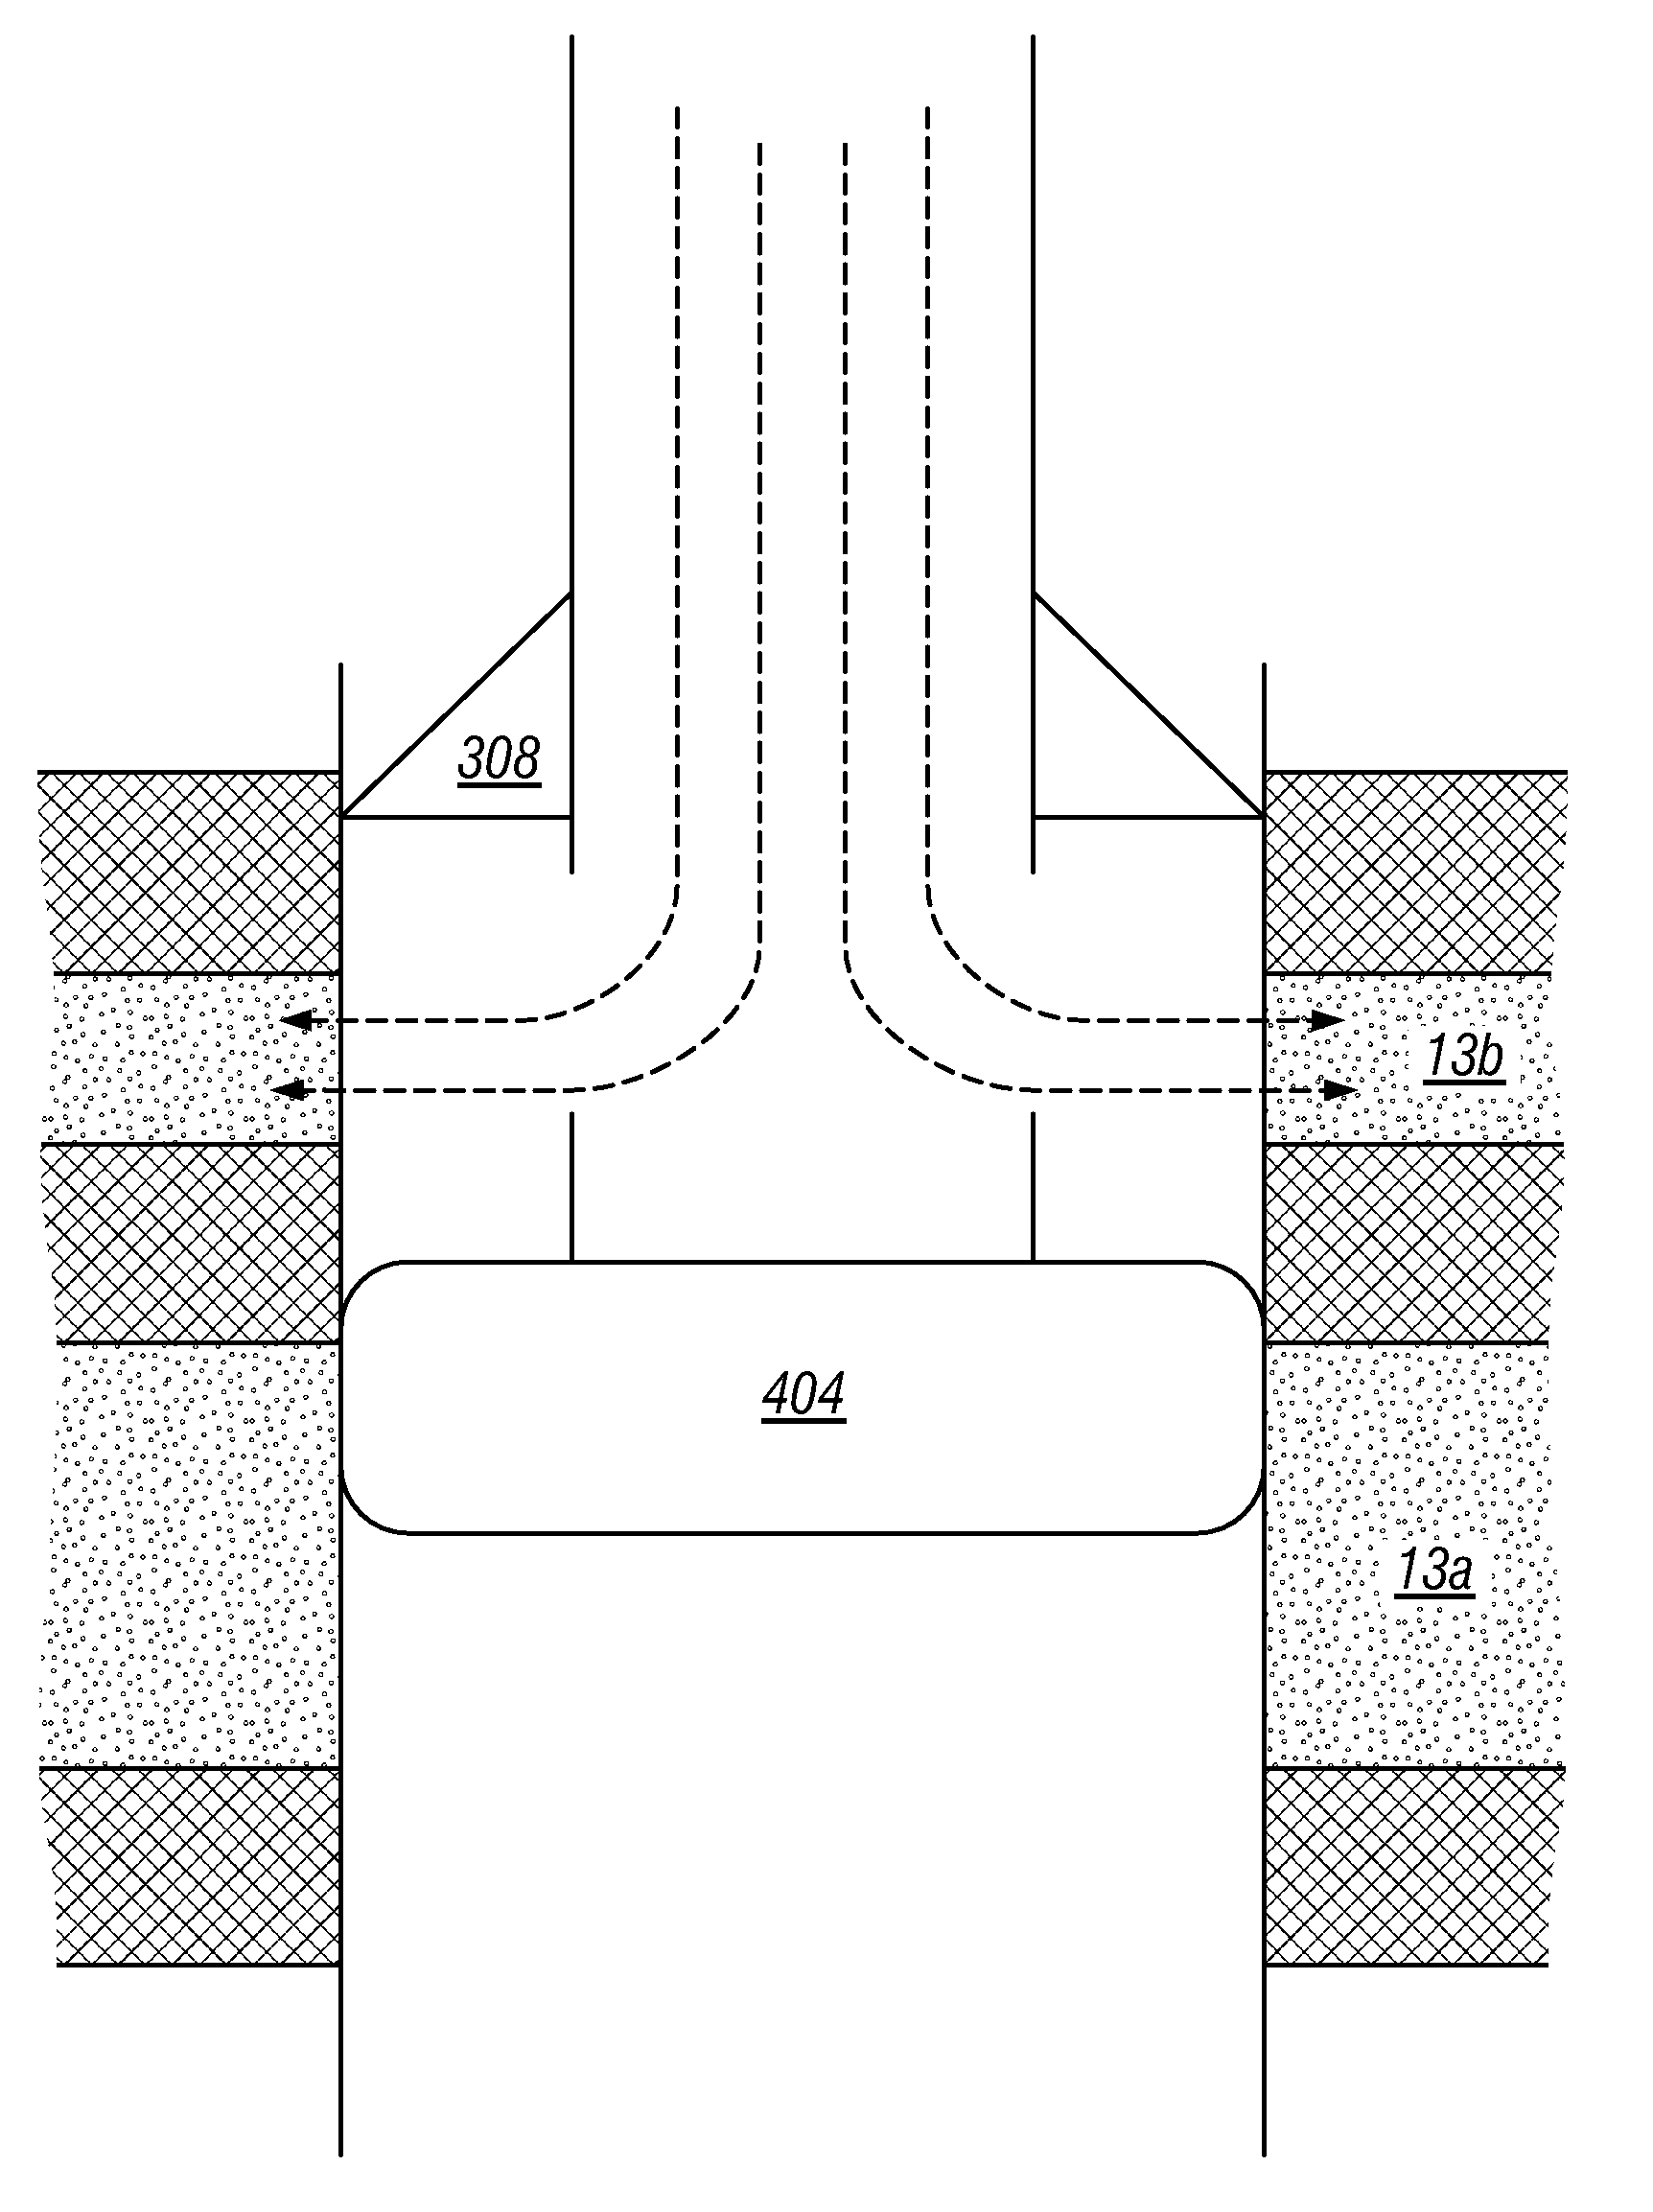 Well treatment device, method and system